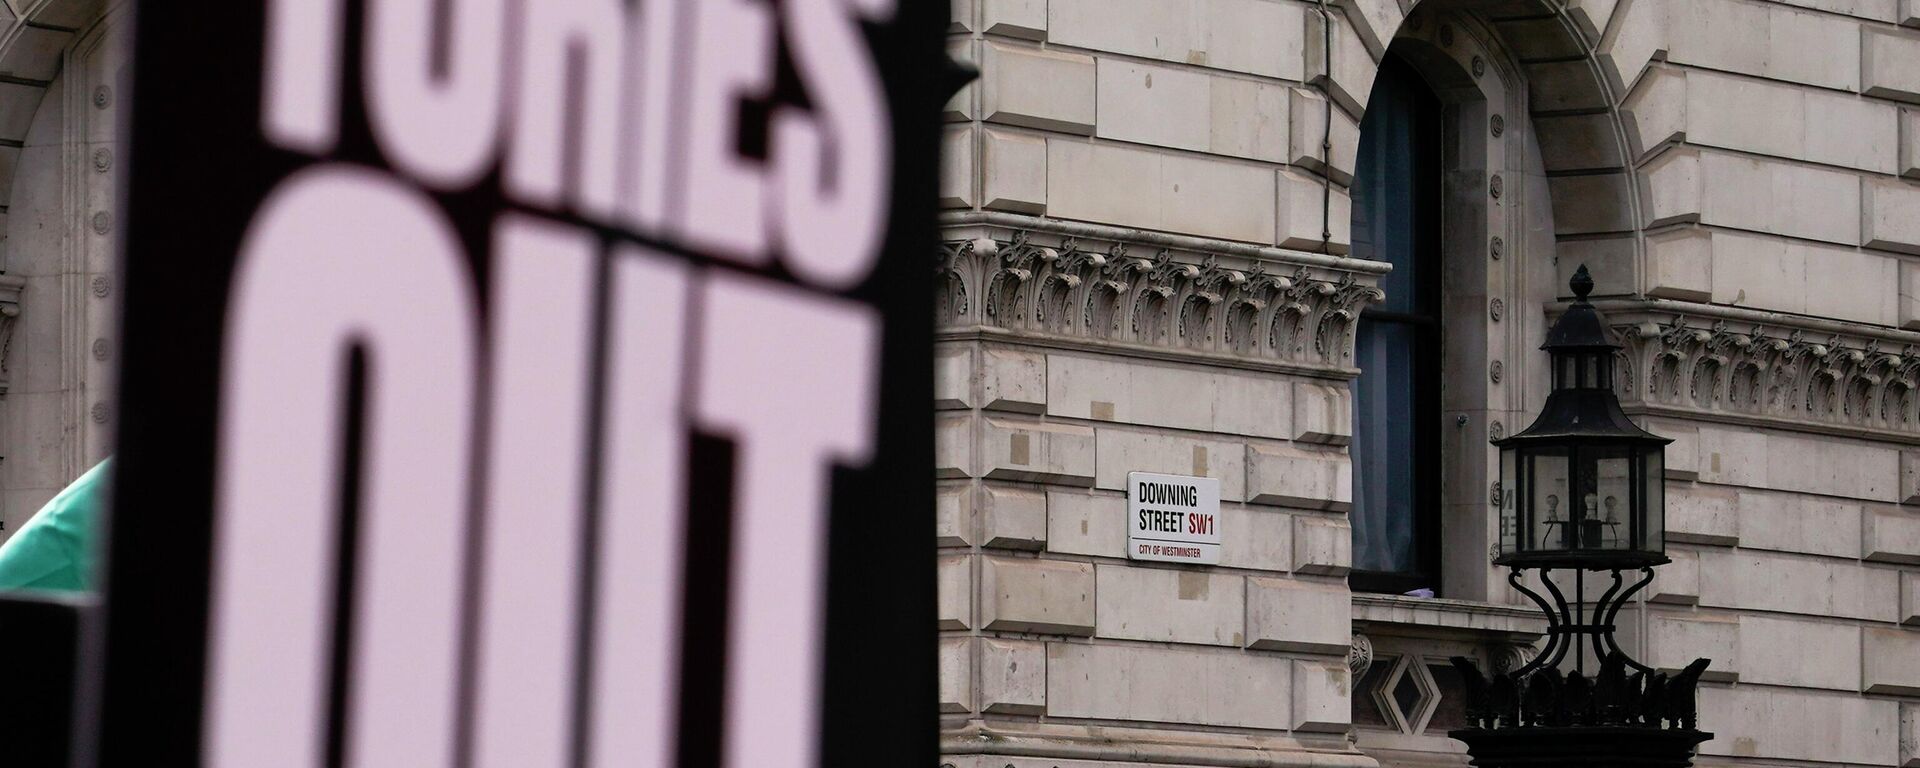 The road sign of Downing Street seen behind a placard reading 'Tories out', during a protest against the increase of the cost of living, in London, Saturday, April 2, 2022. - Sputnik International, 1920, 21.06.2022